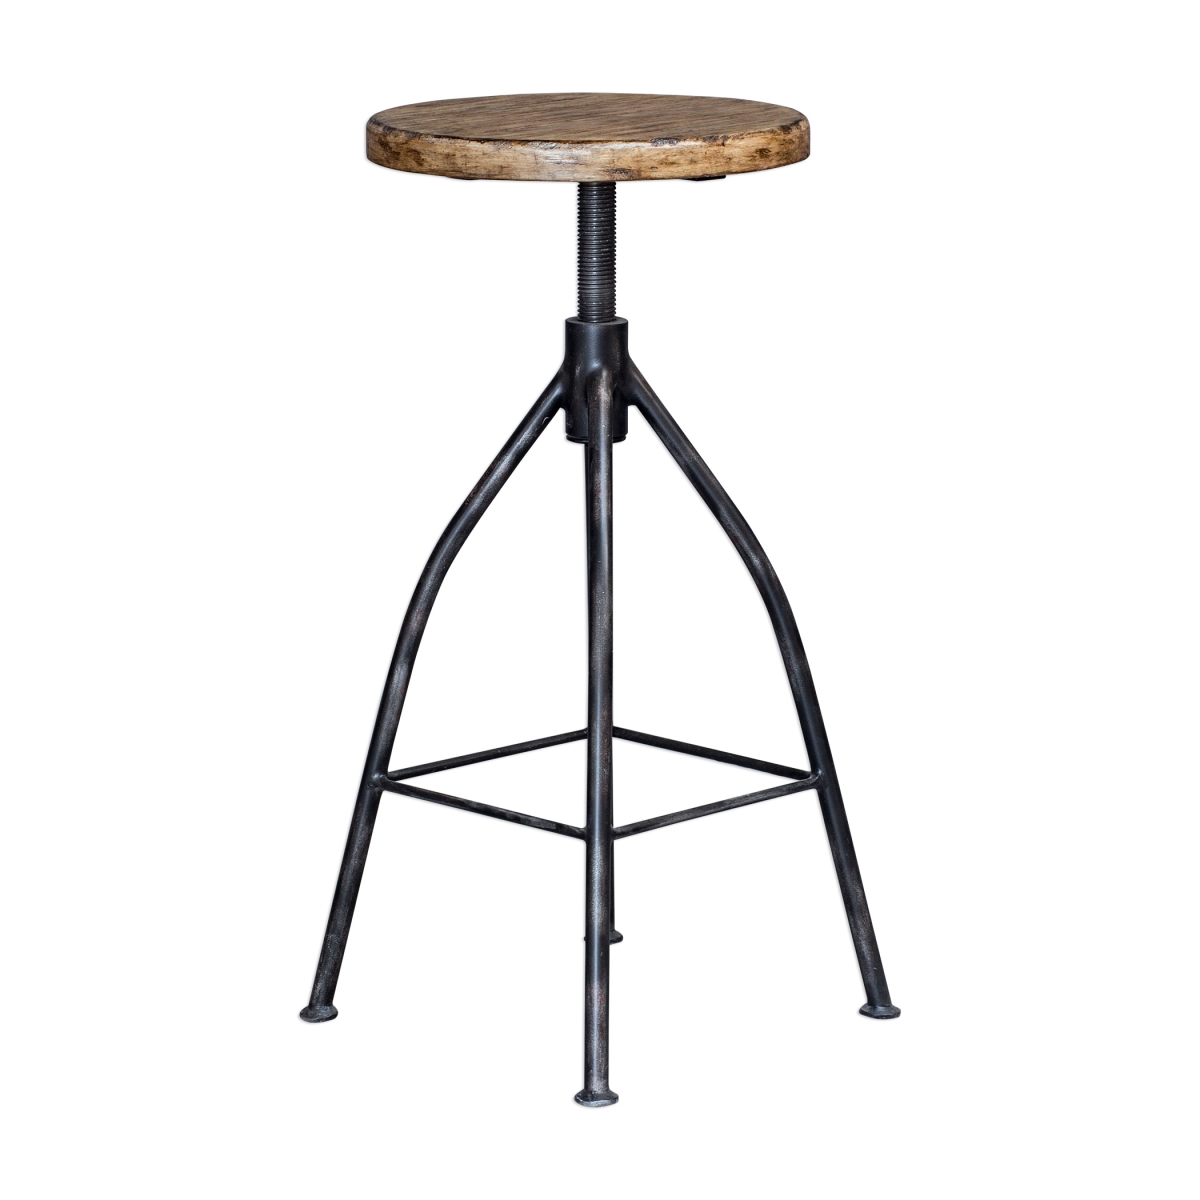 Picture of 212 Main 25429 Dalvin Industrial Pub Stool